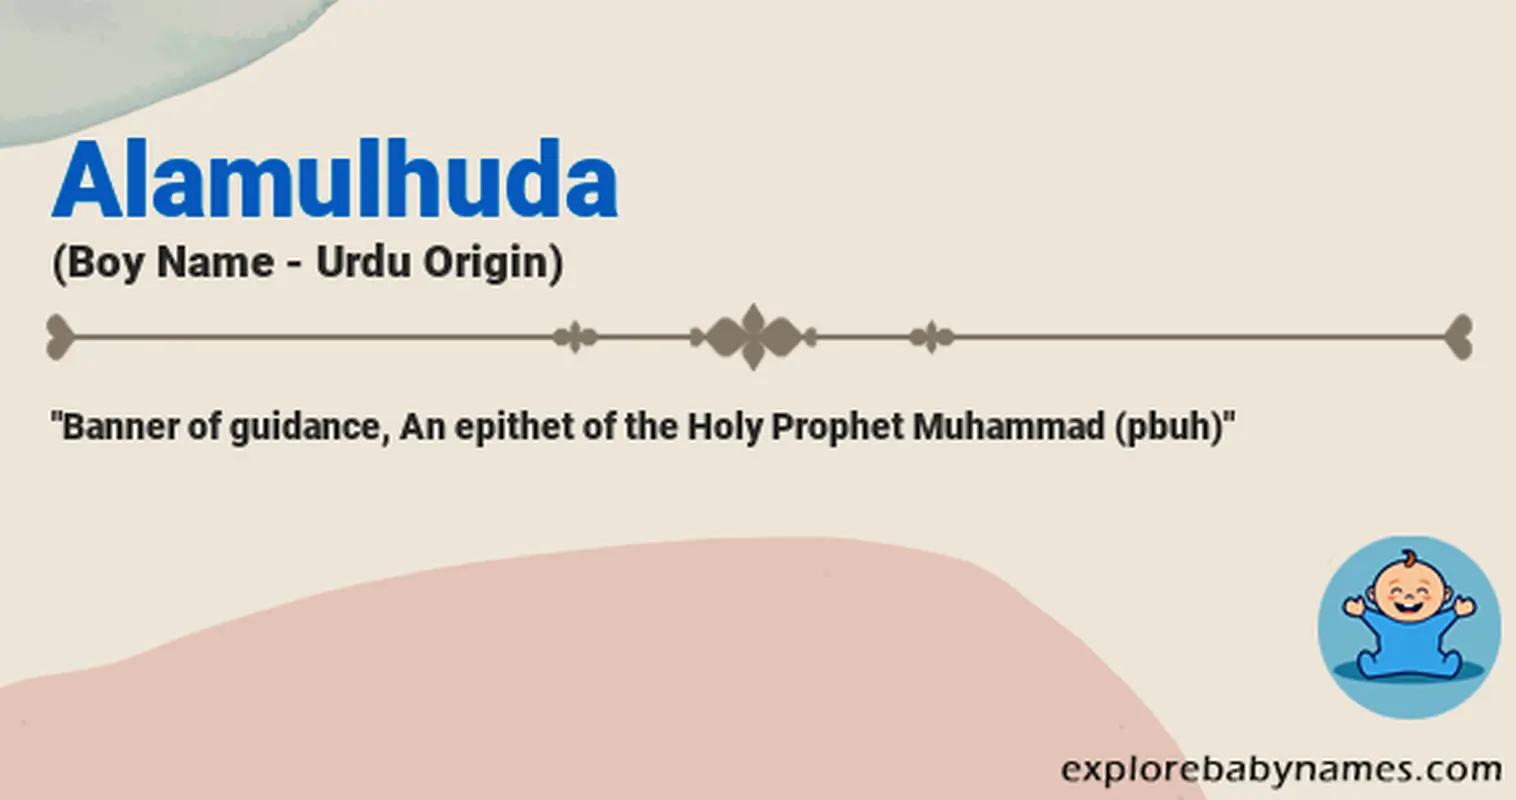 Meaning of Alamulhuda